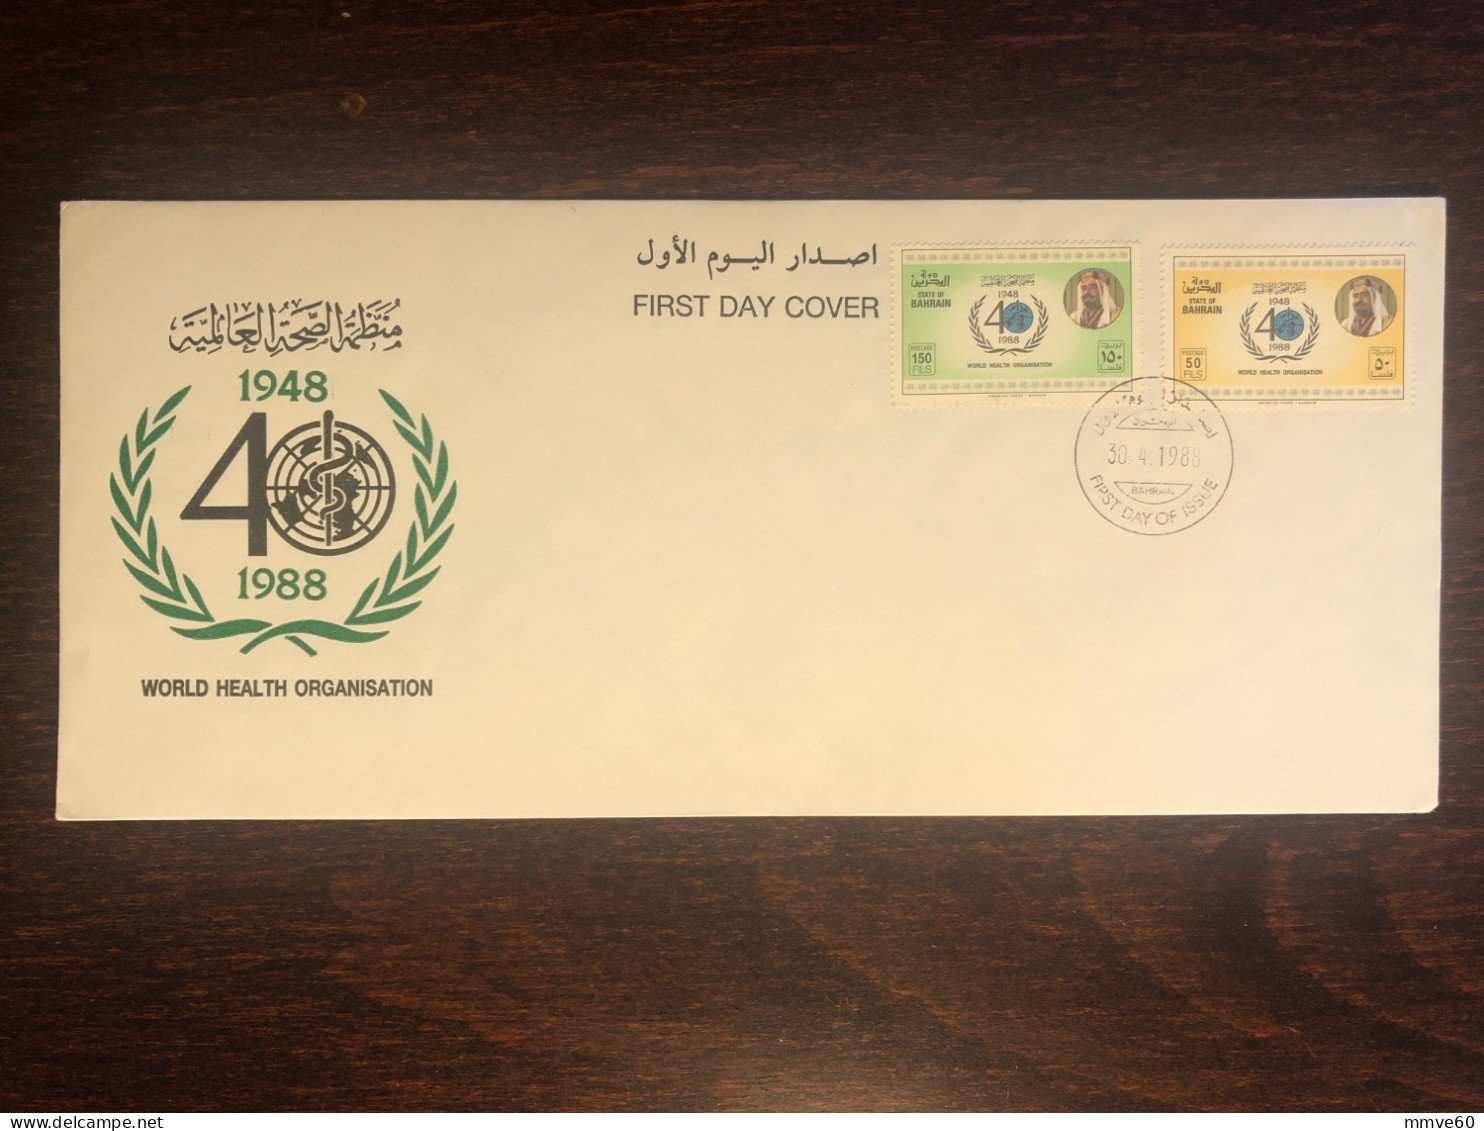 BAHRAIN FDC COVER 1988 YEAR WHO OMS HEALTH MEDICINE STAMPS - Bahrain (1965-...)